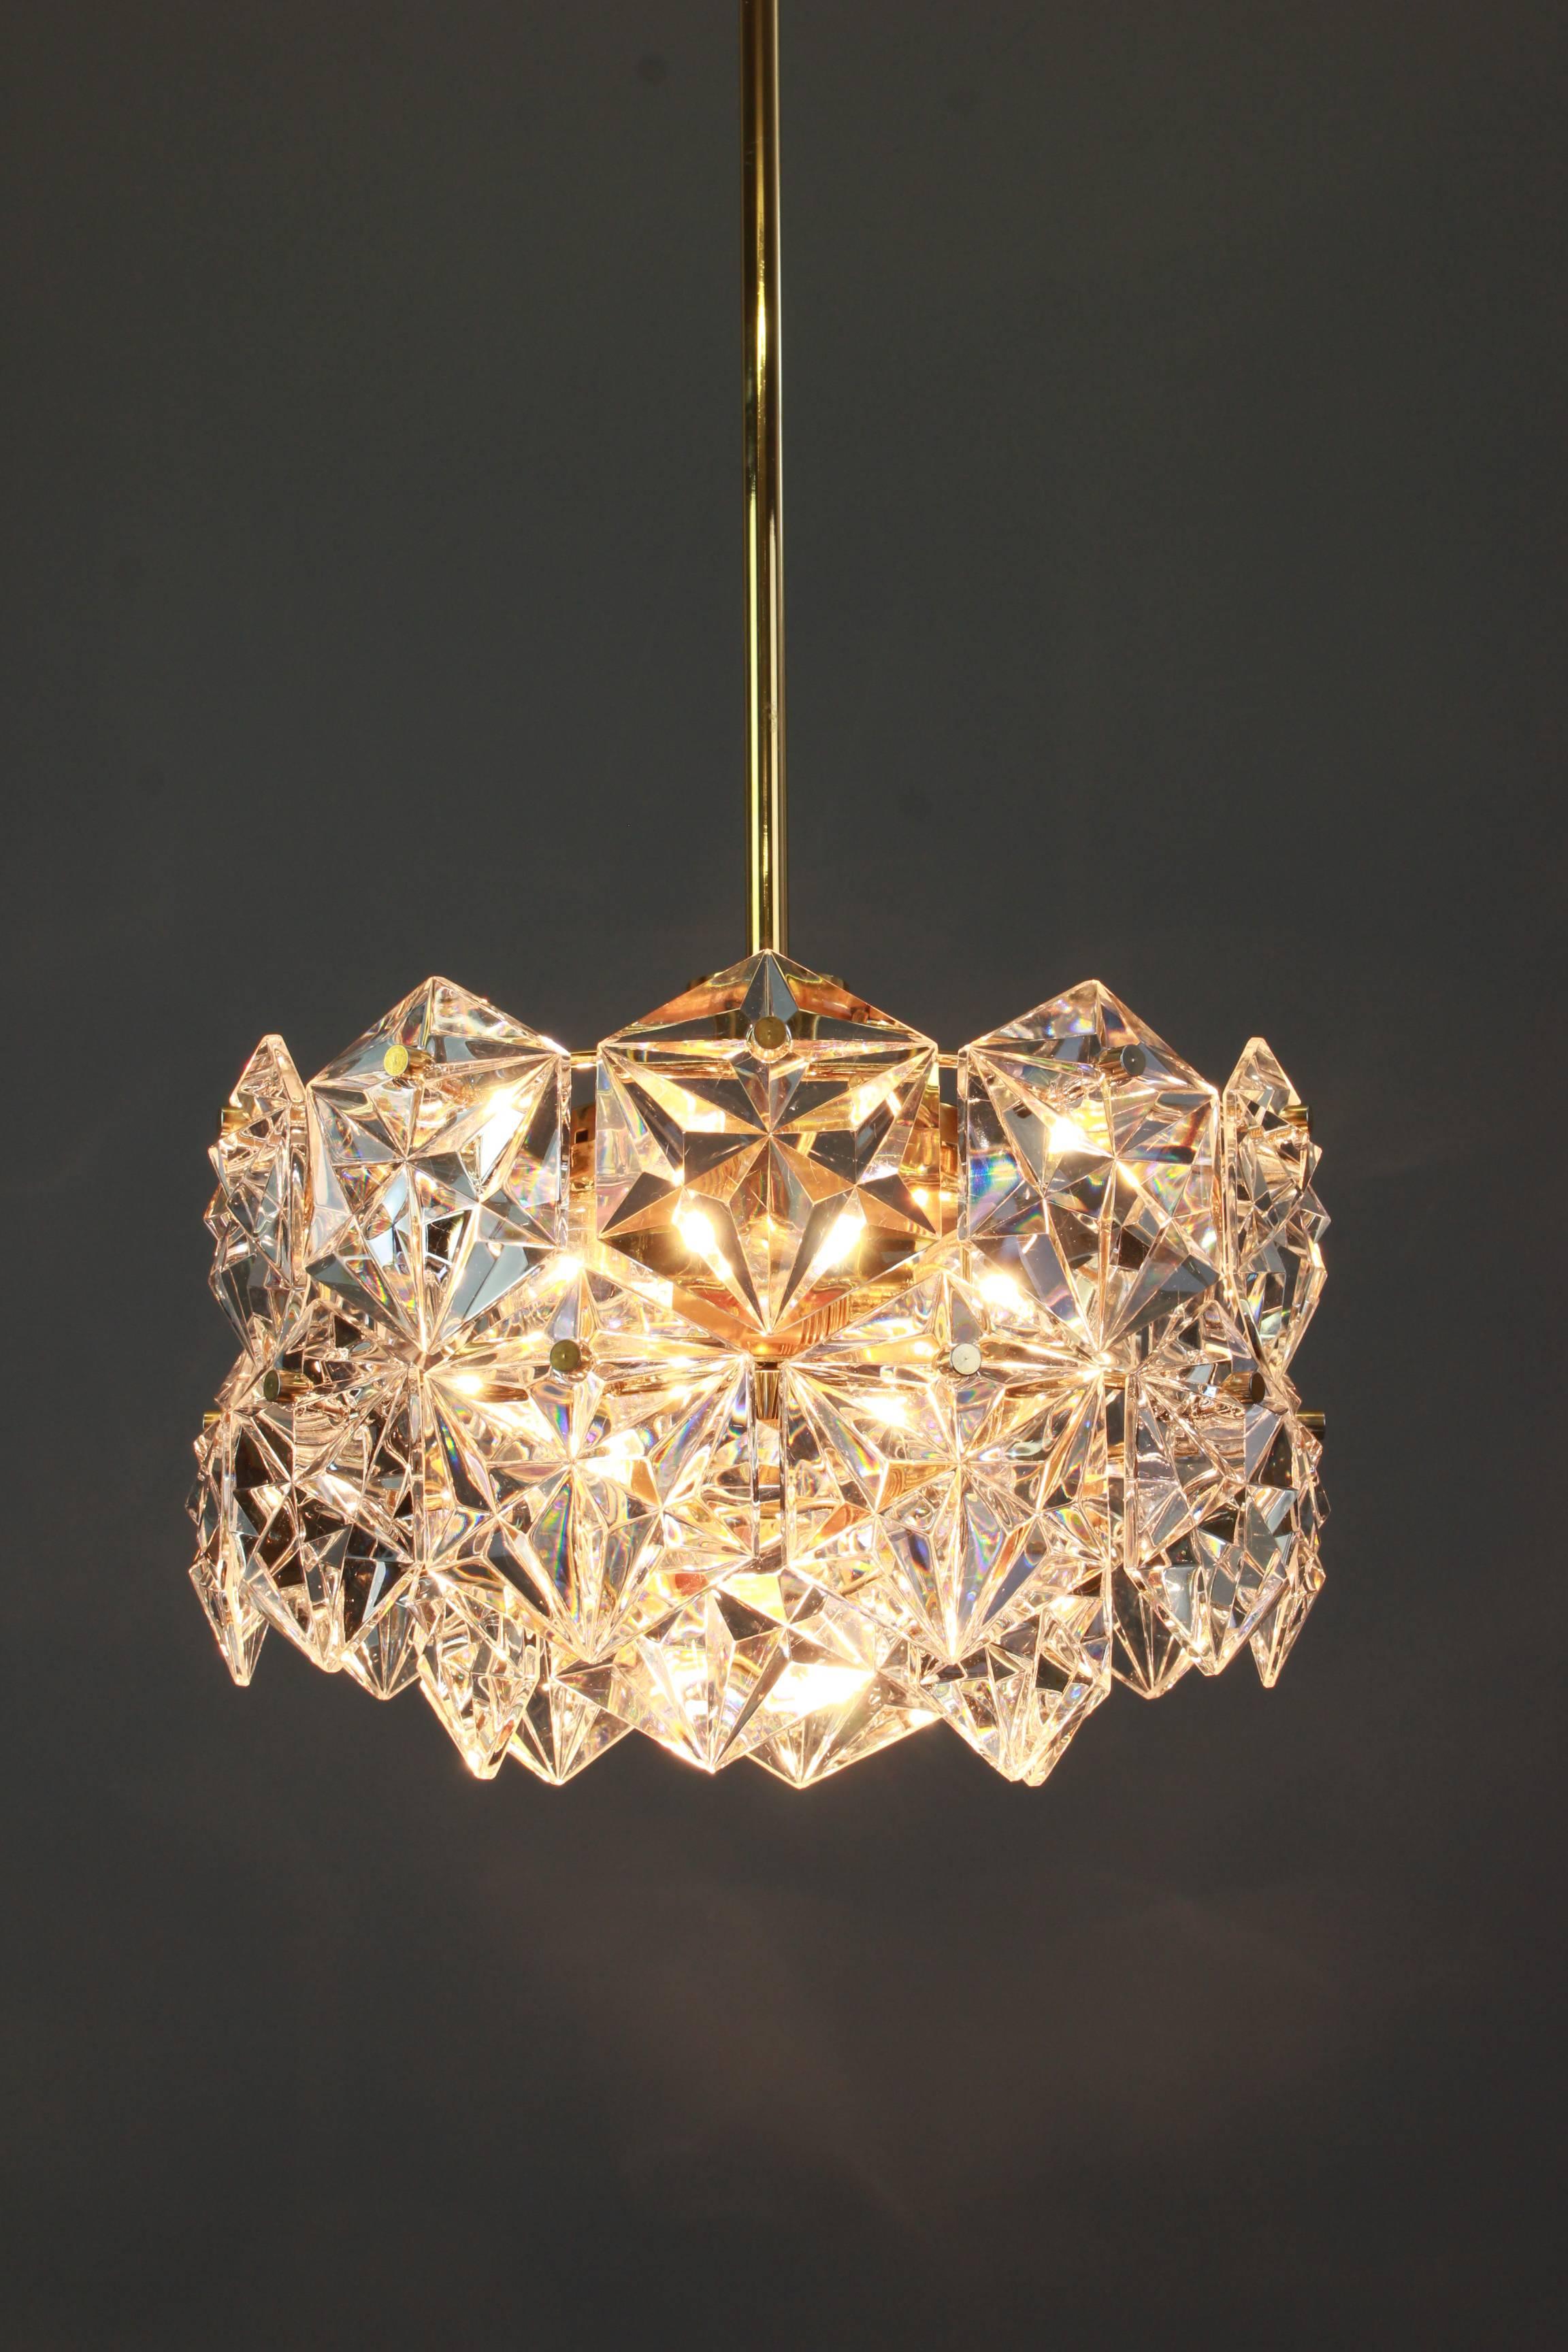 Gold Plate 1 of 2 Stunning Chandelier, Brass and Crystal Glass by Kinkeldey, Germany, 1970